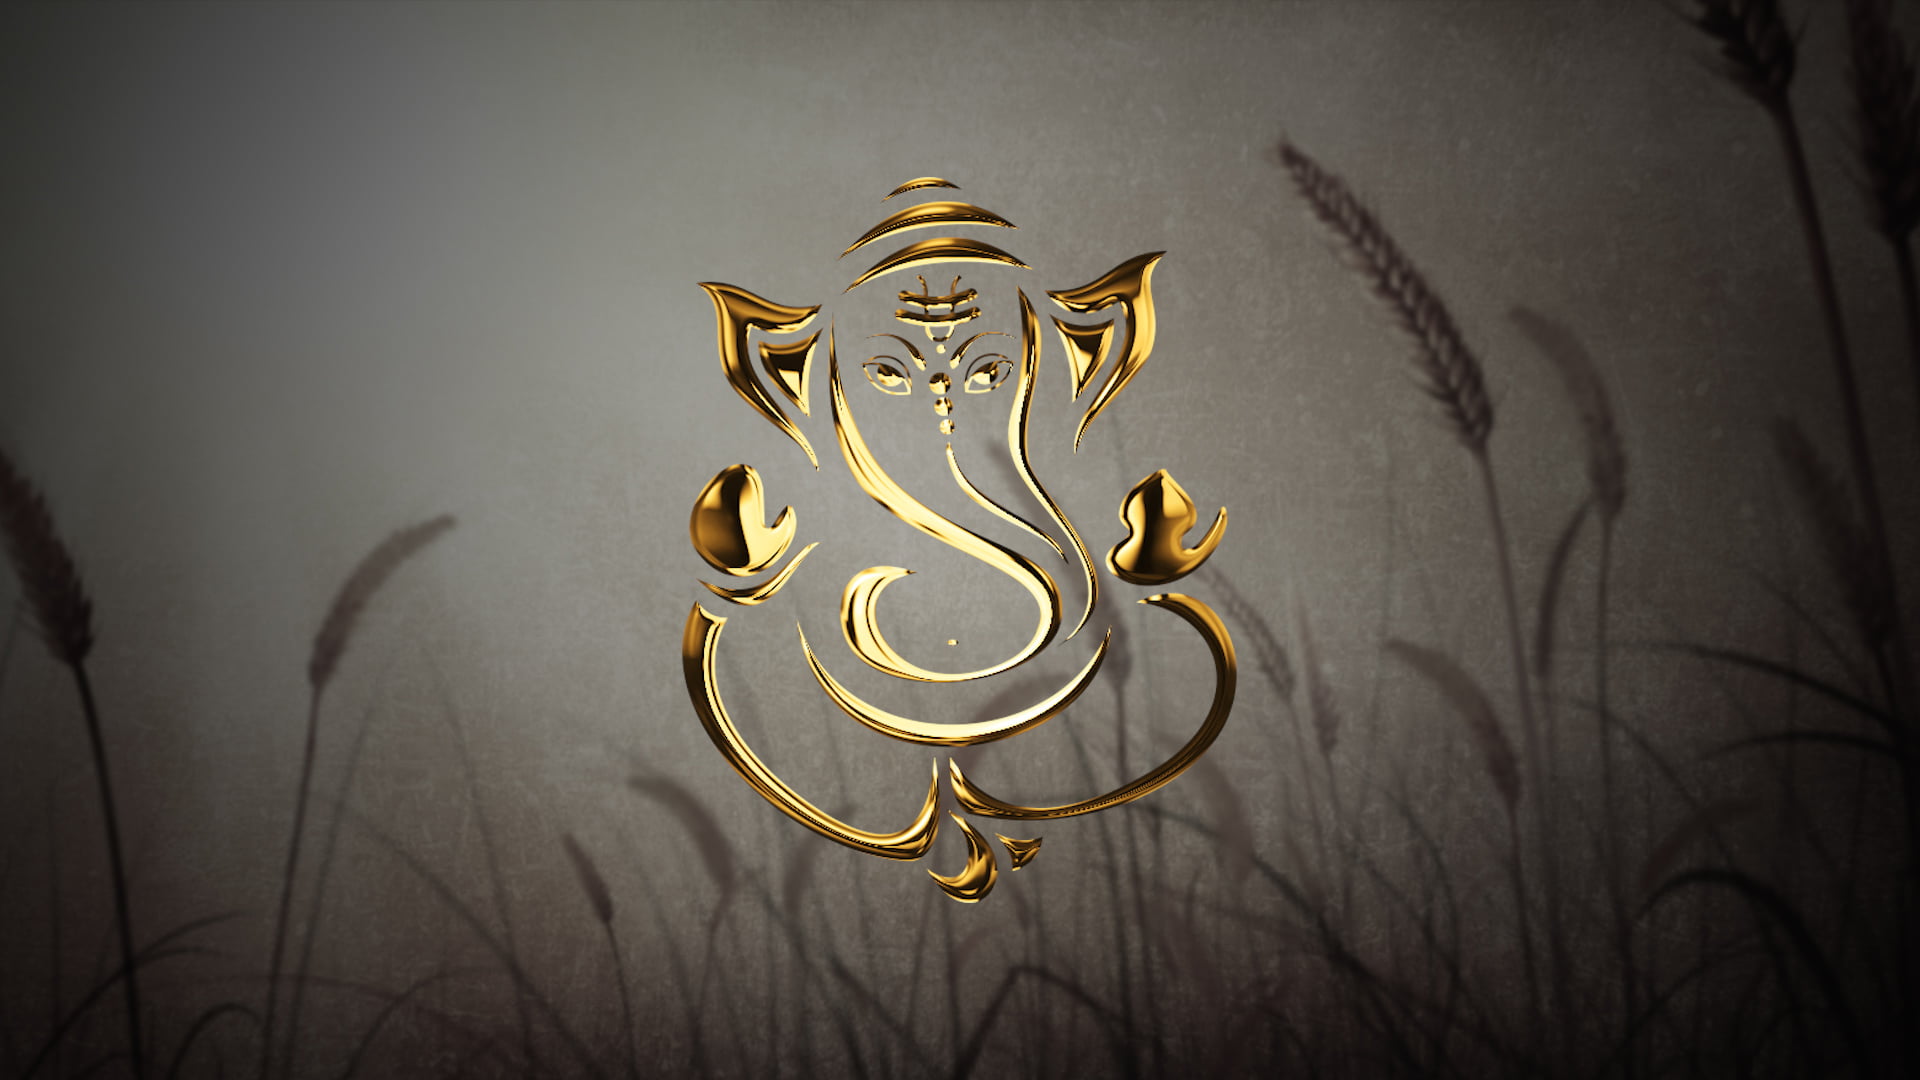 4K Shree Ganesh Animated Golden Intro Footage For Wedding Free Download